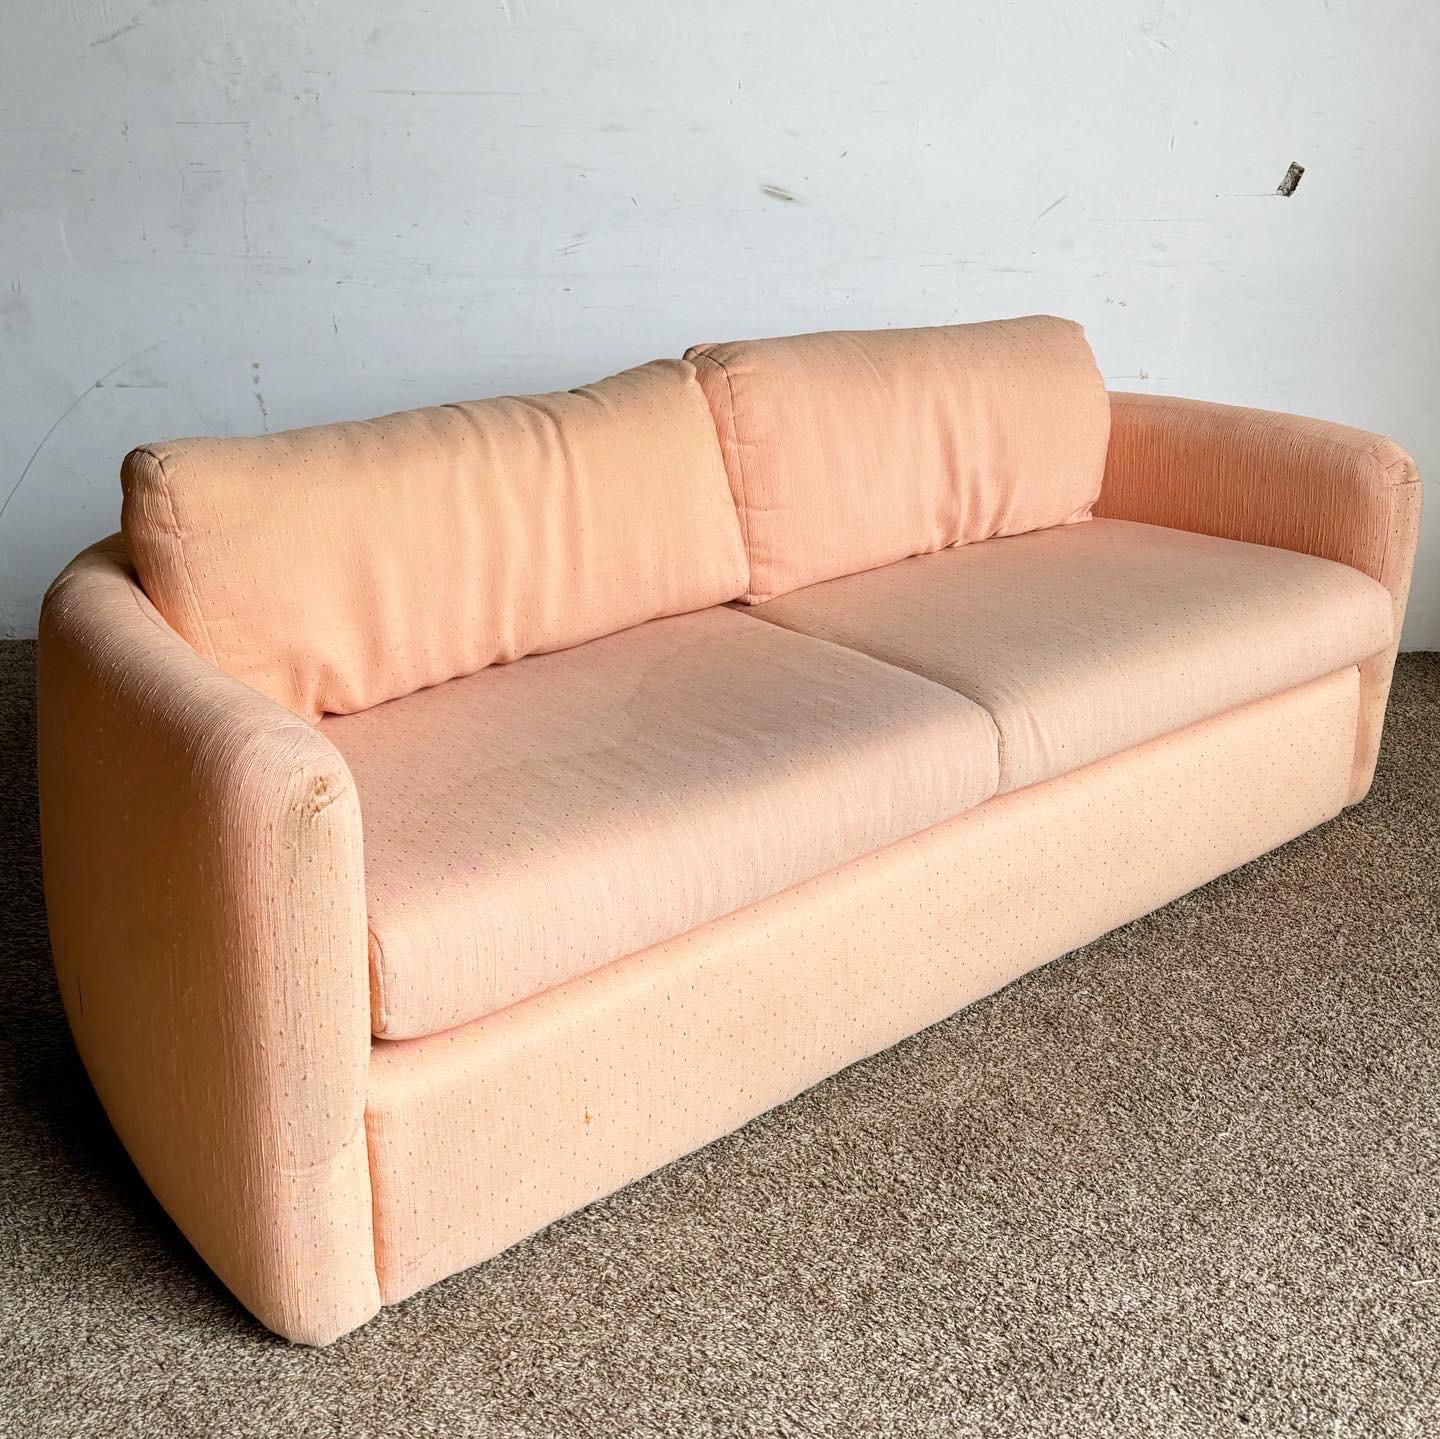 The Postmodern Pink Sofa by Thayer Coggin is a vibrant and stylish addition to any modern interior. With its bold pink upholstery and clean lines, this sofa embodies postmodern charm and comfort, perfect for bringing a lively and contemporary flair